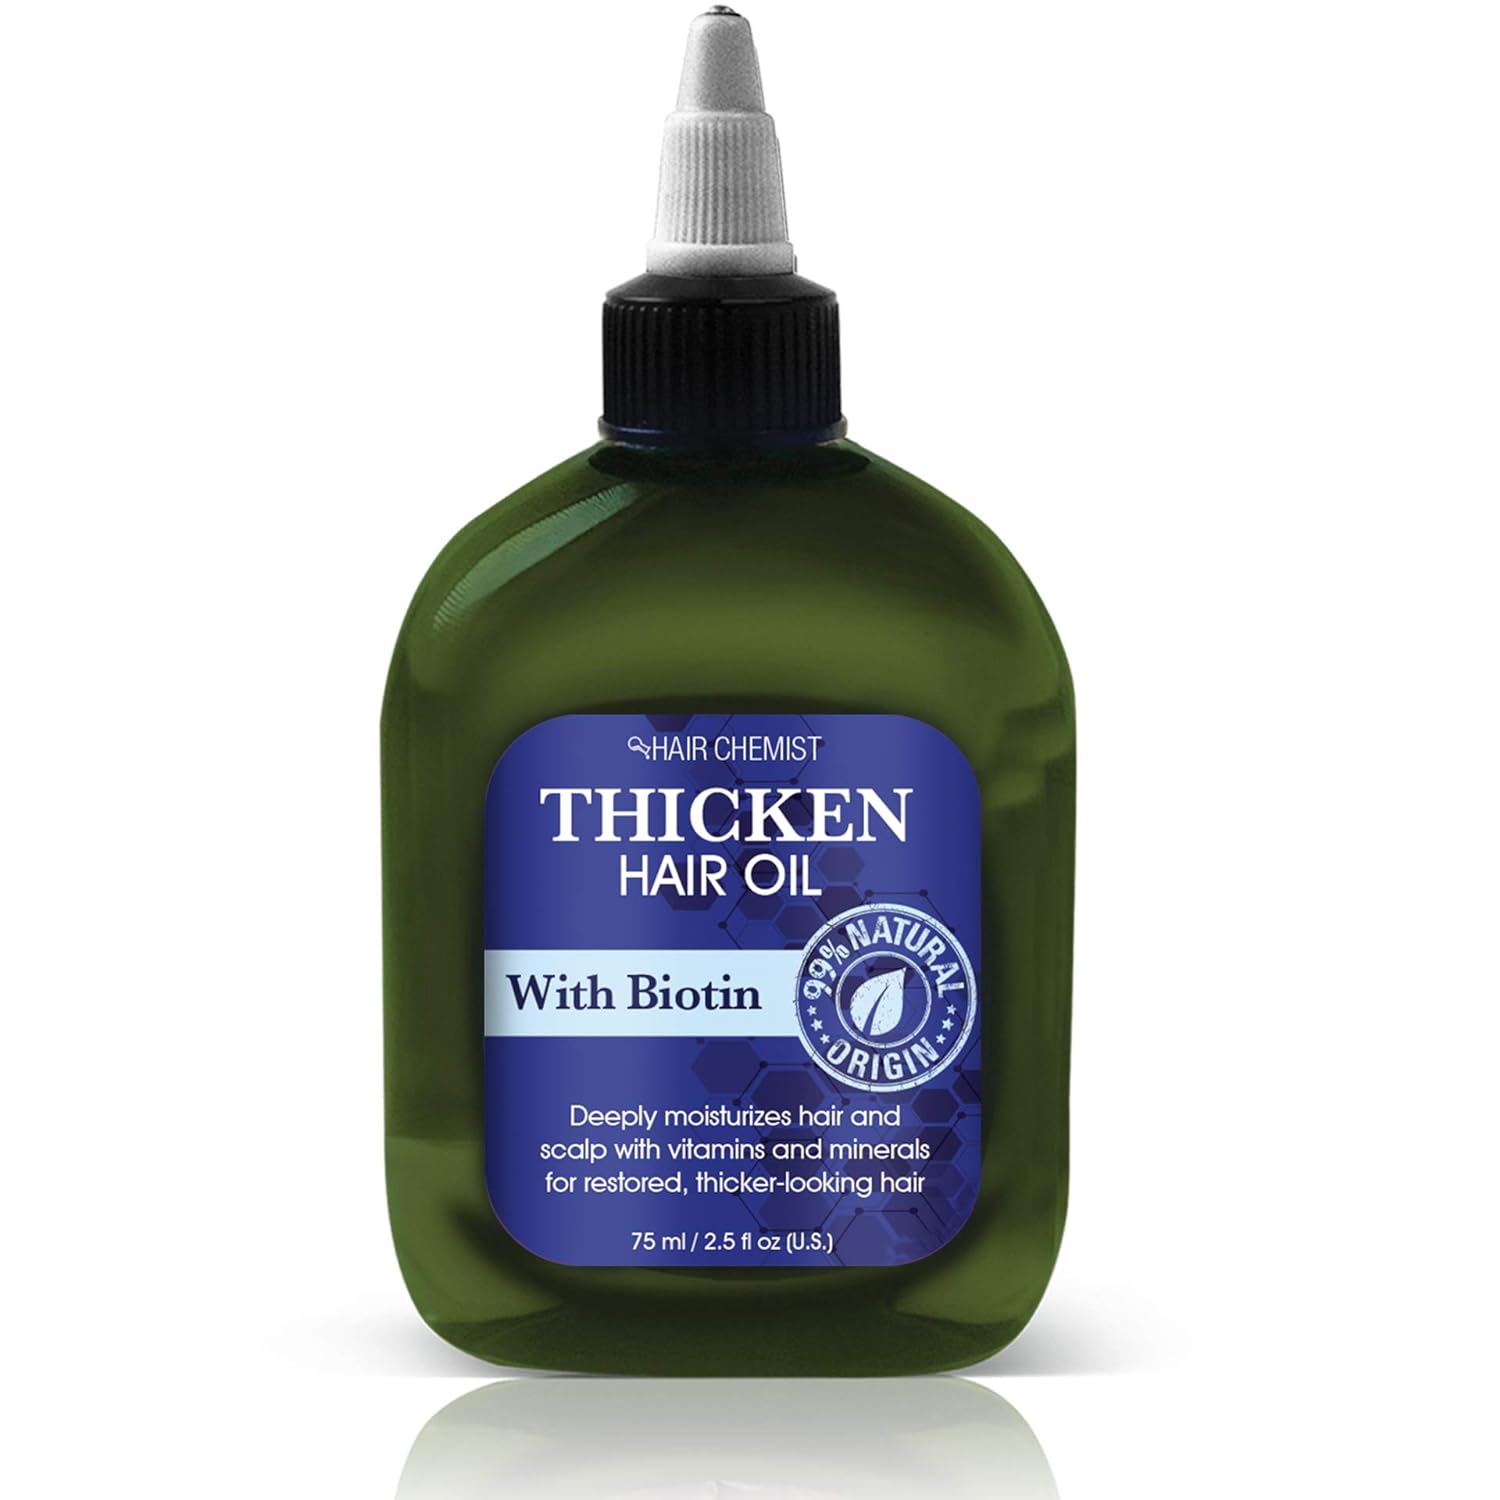 Hair-Chemist-Solutions-Thicken-Hair-Oil-with-19